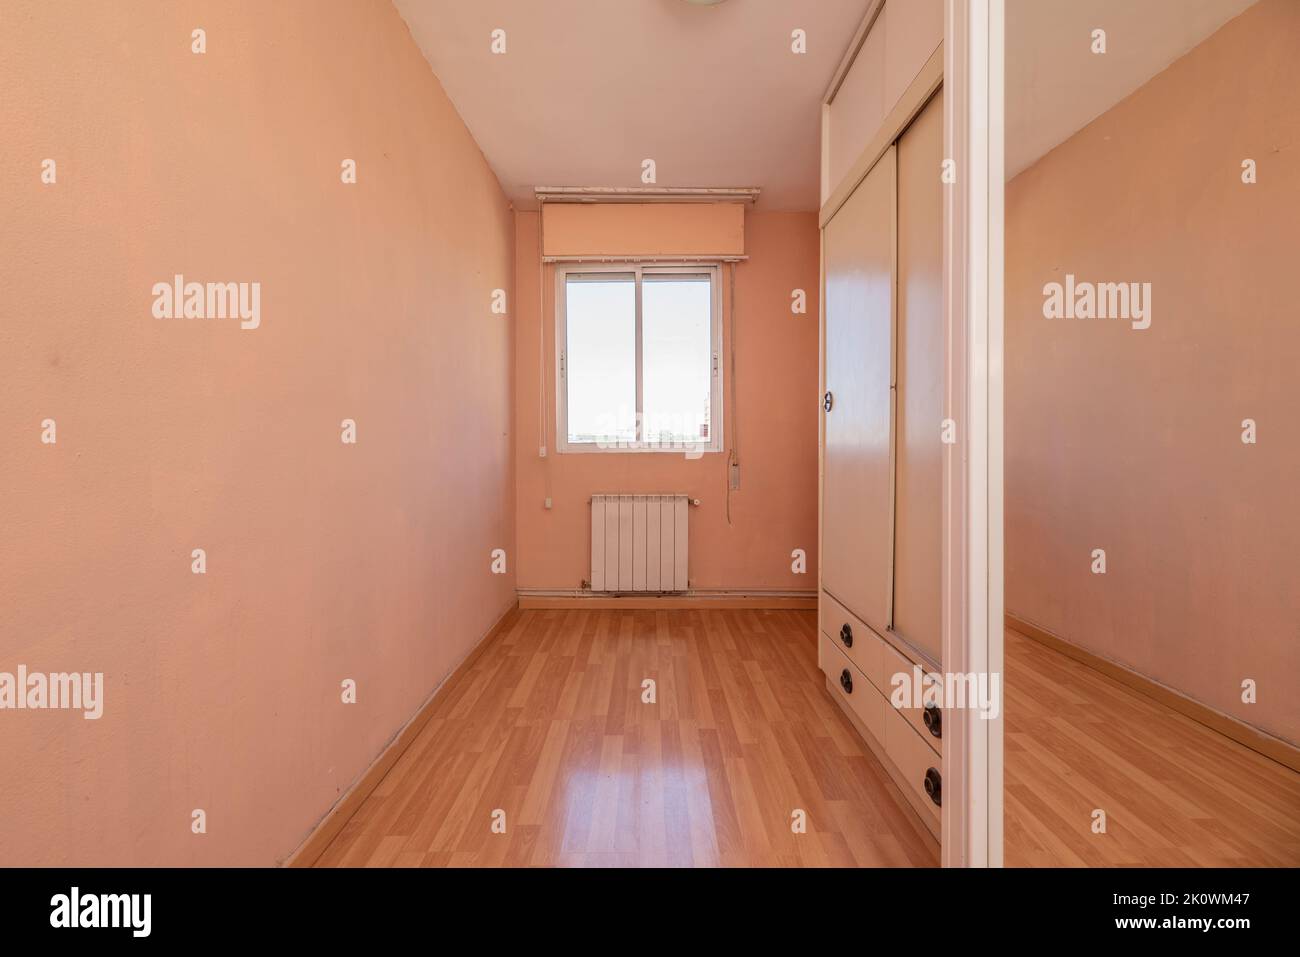 Room with mirrored sliding door wardrobe and glass window and aluminum sheet and pale pink painted walls Stock Photo